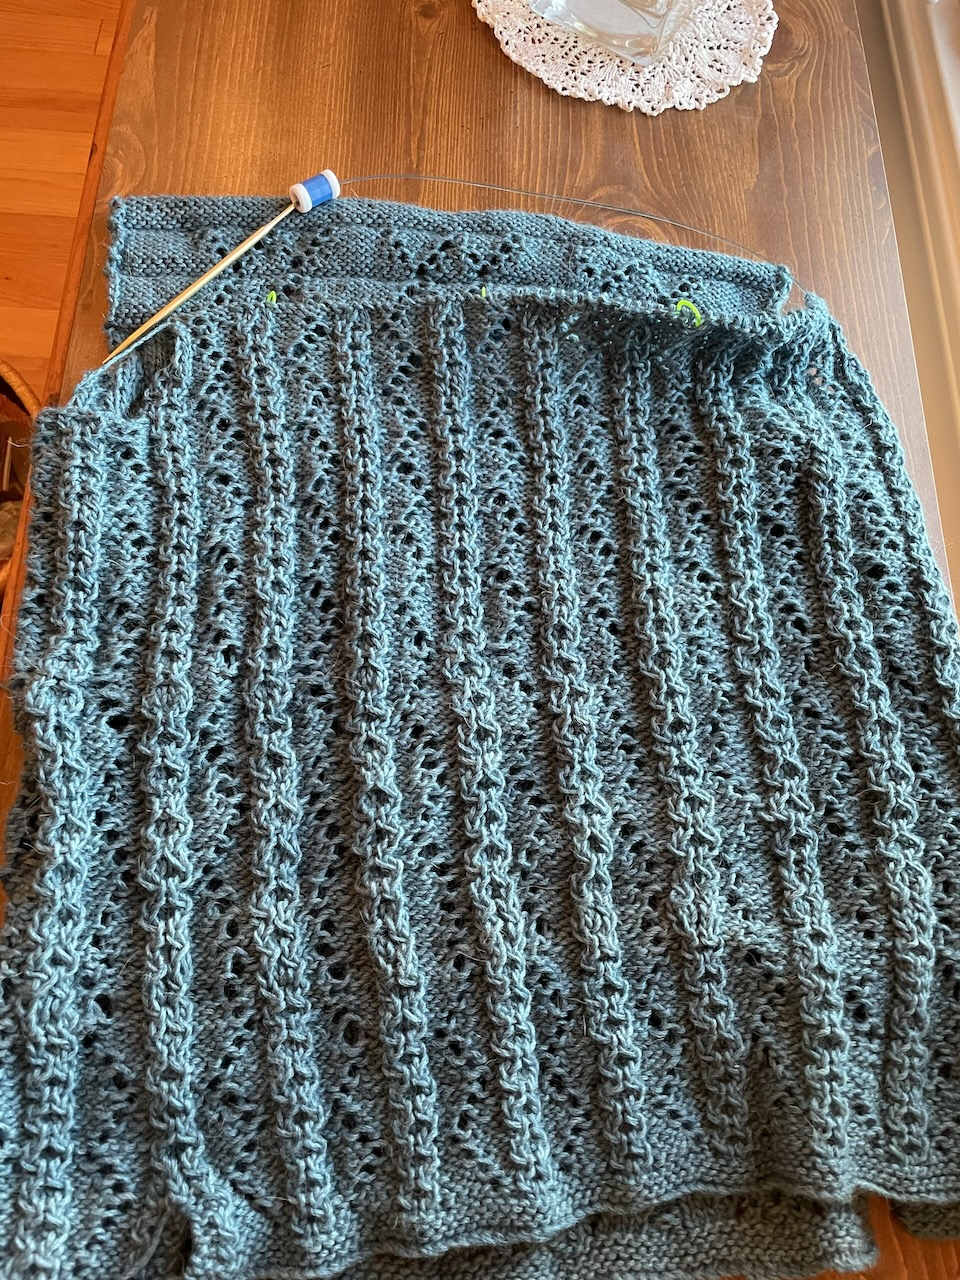 A blue sweater in progress with a complex lace and cable pattern. In the background, the edge of a knit doily.